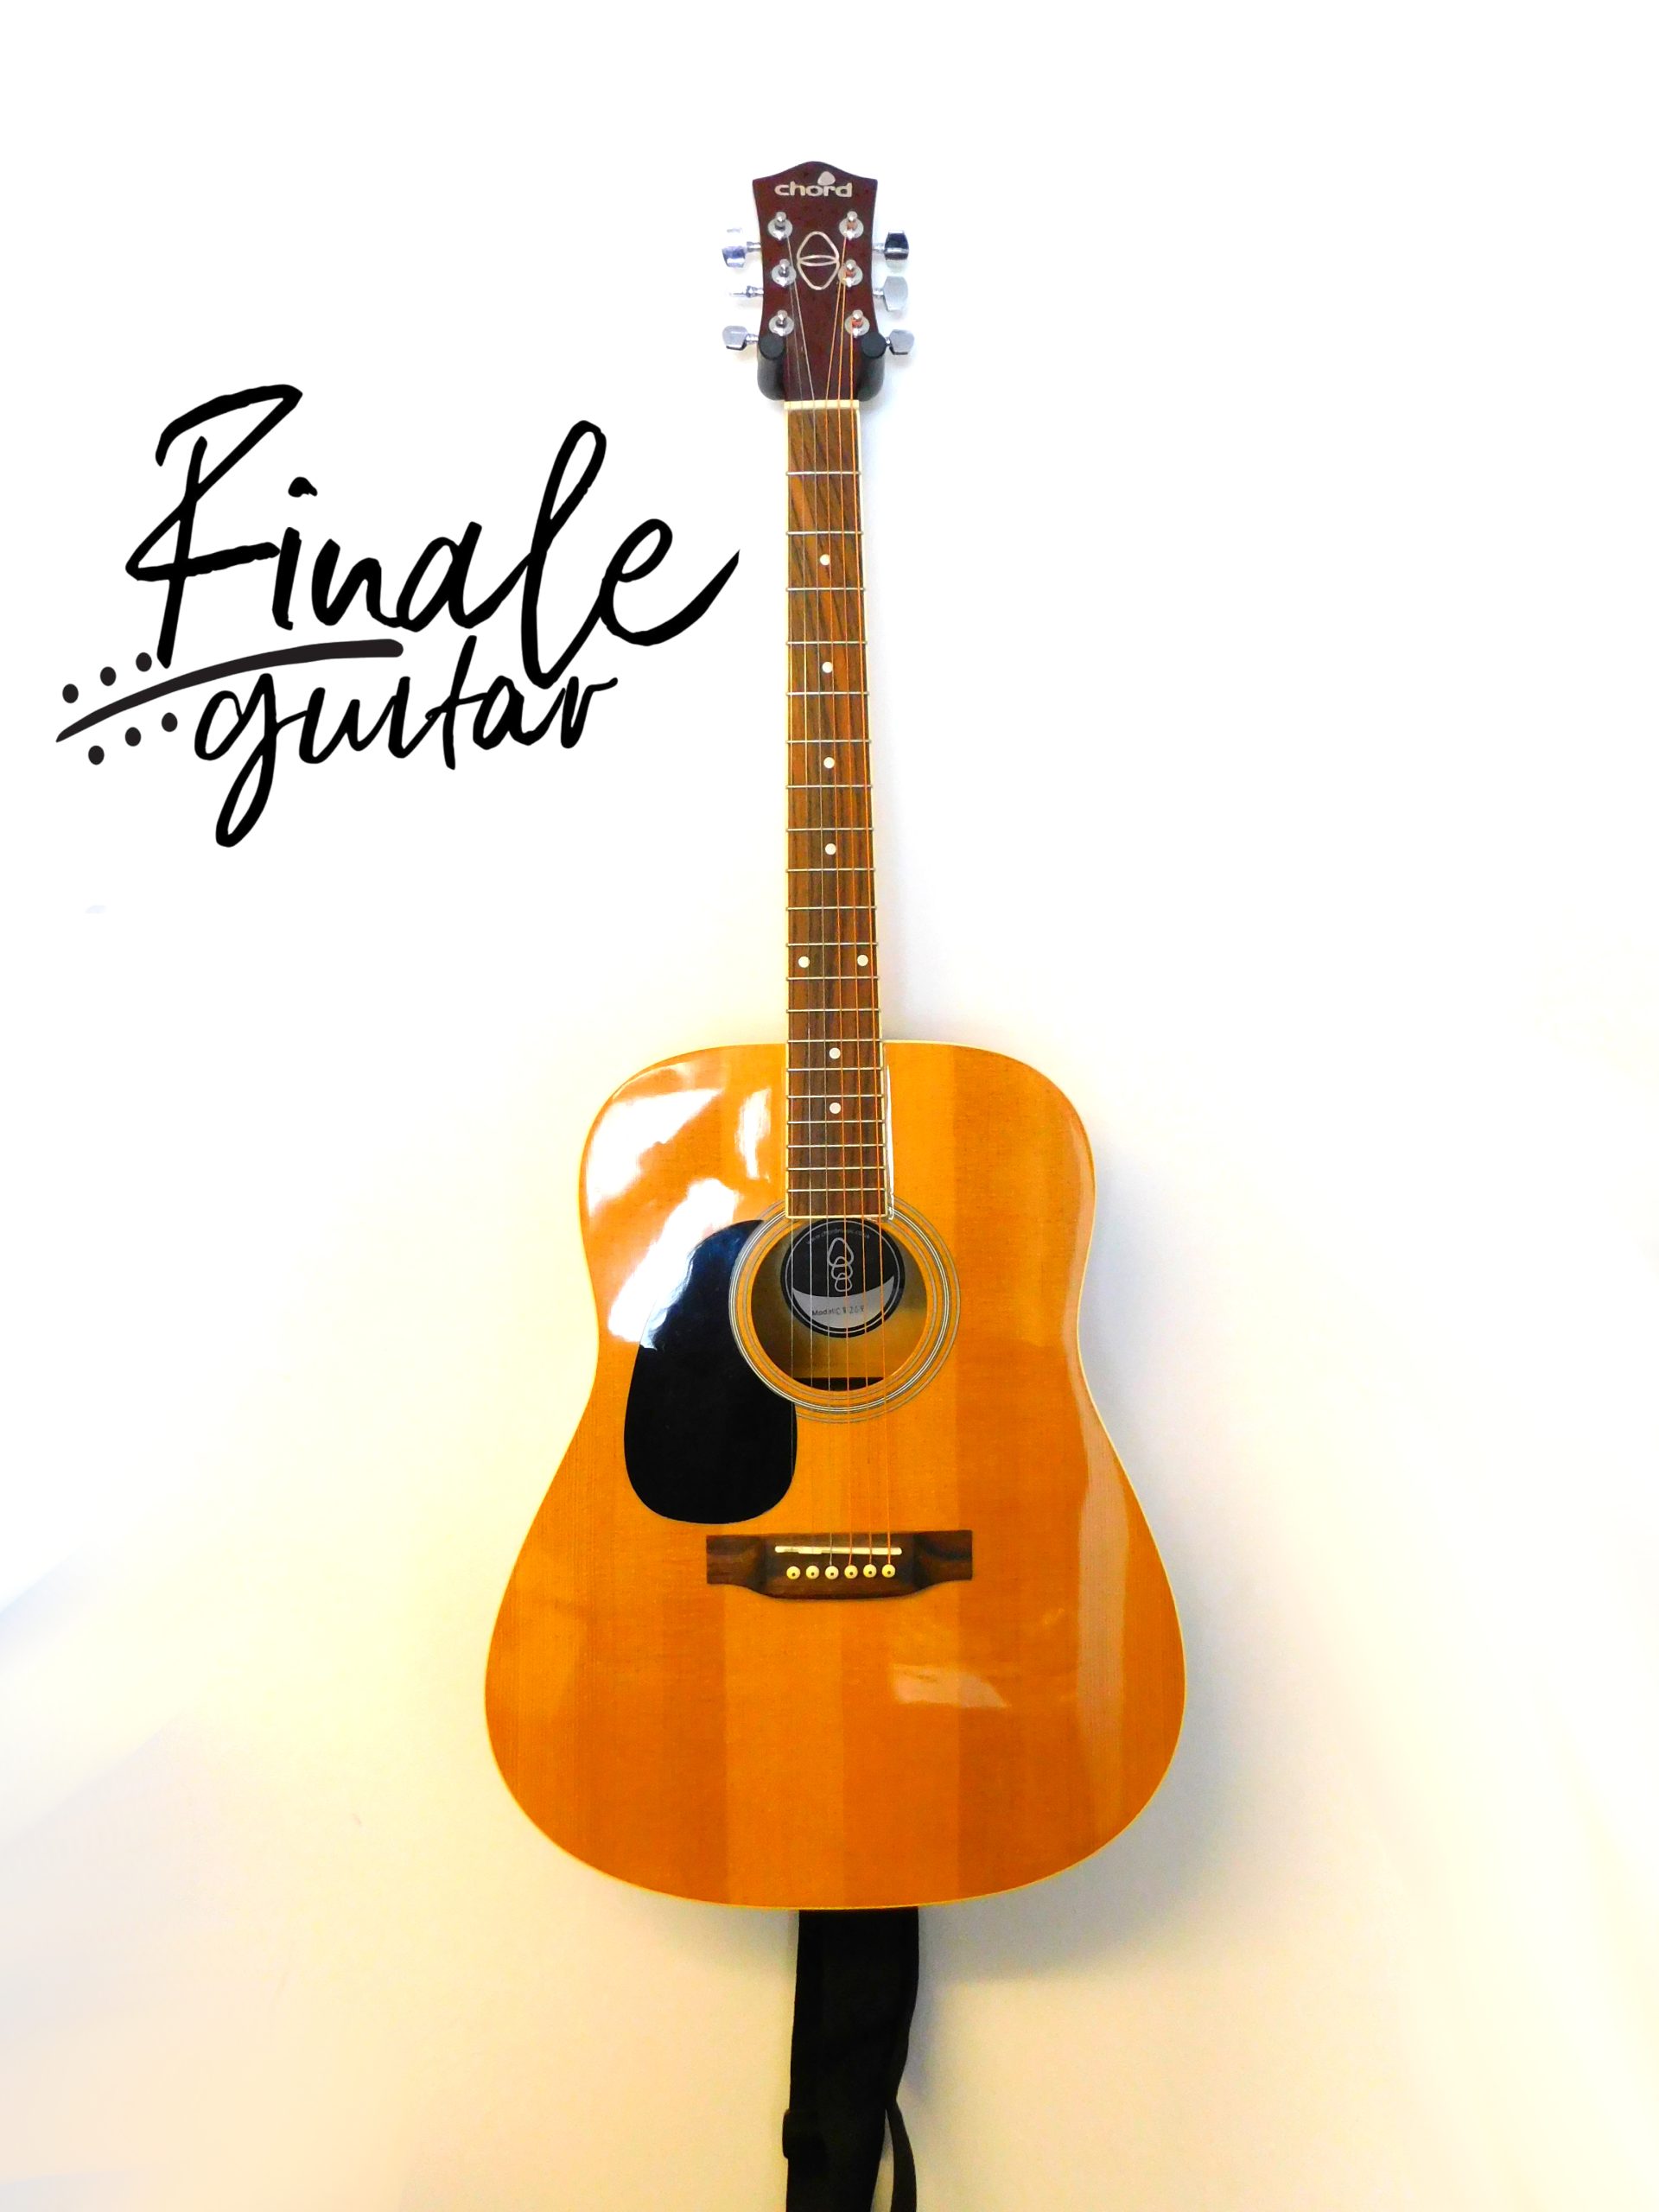 Chord Left-handed Acoustic Guitar for sale in our Sheffield guitar shop, Finale Guitar